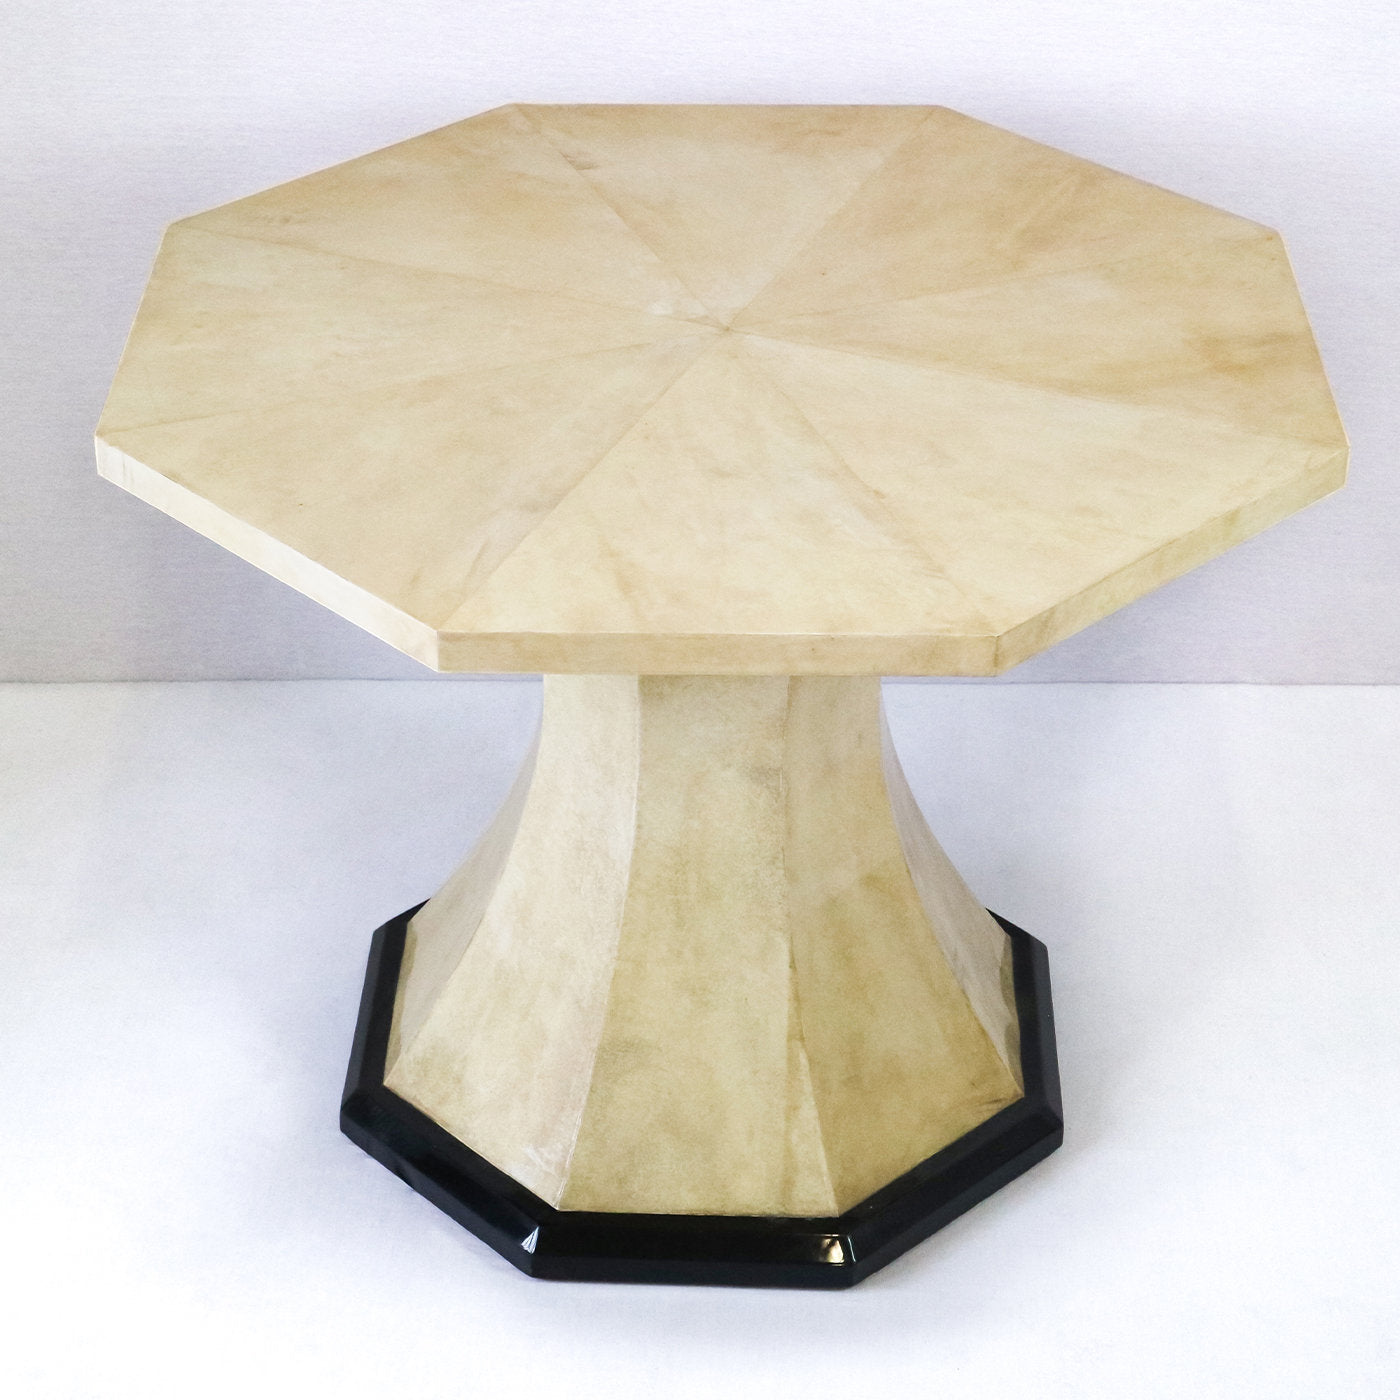 Parchment Hexagonal Dining Table - Alternative view 1